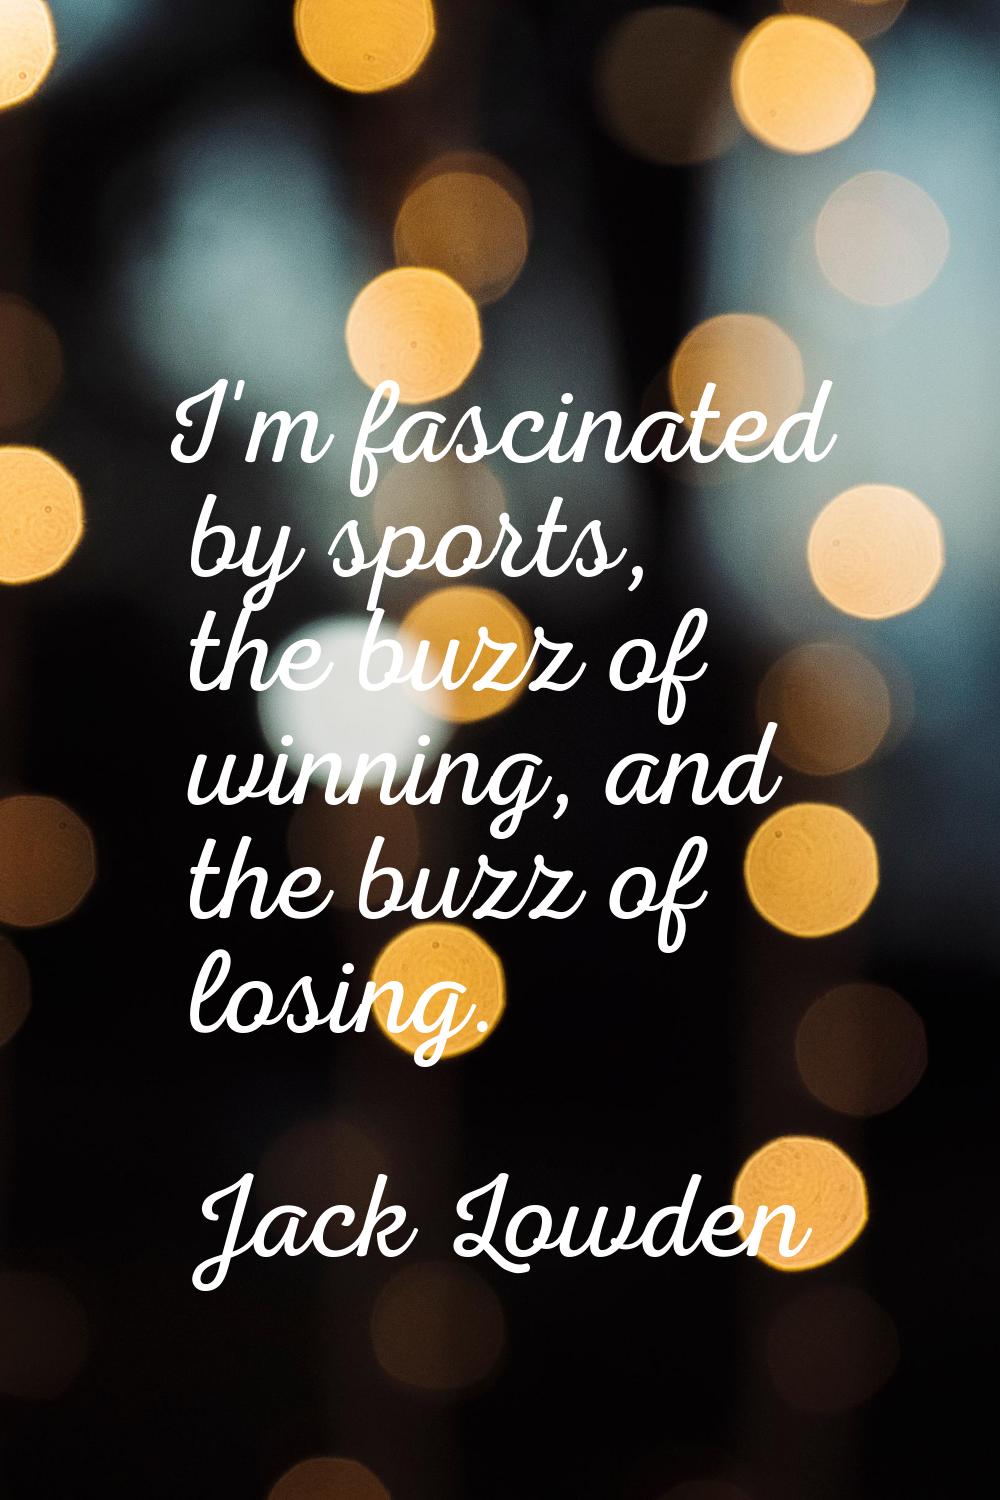 I'm fascinated by sports, the buzz of winning, and the buzz of losing.